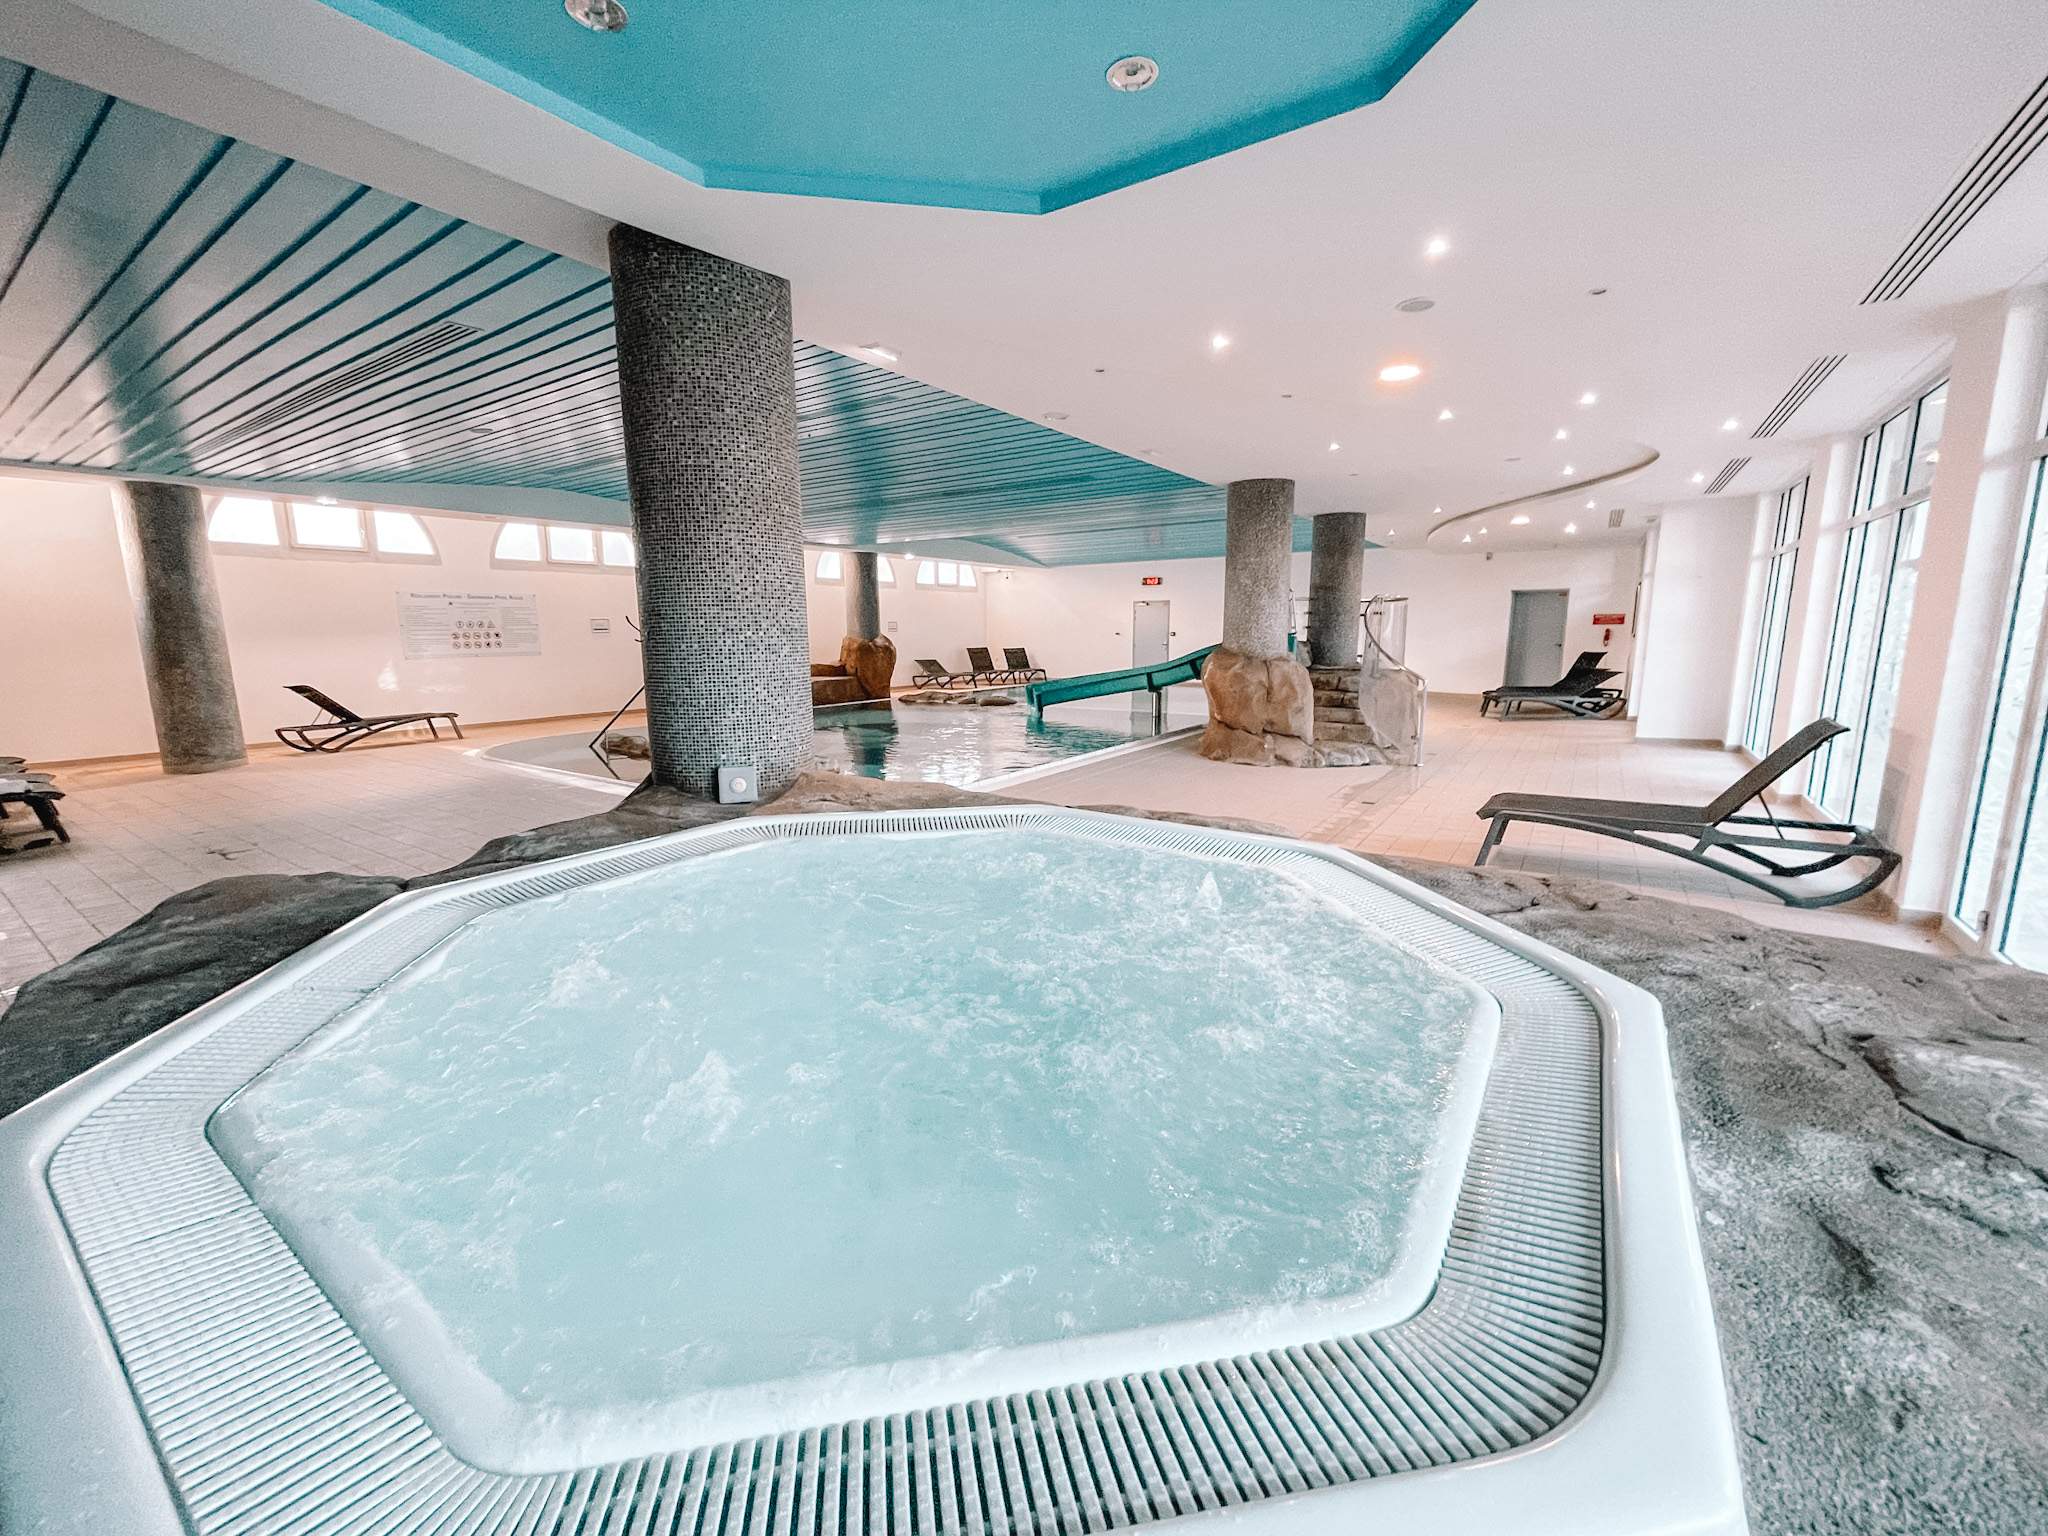 MASSAGES EN DUO RELAXATION PROFONDE - 1H | RESERVER JACUZZI